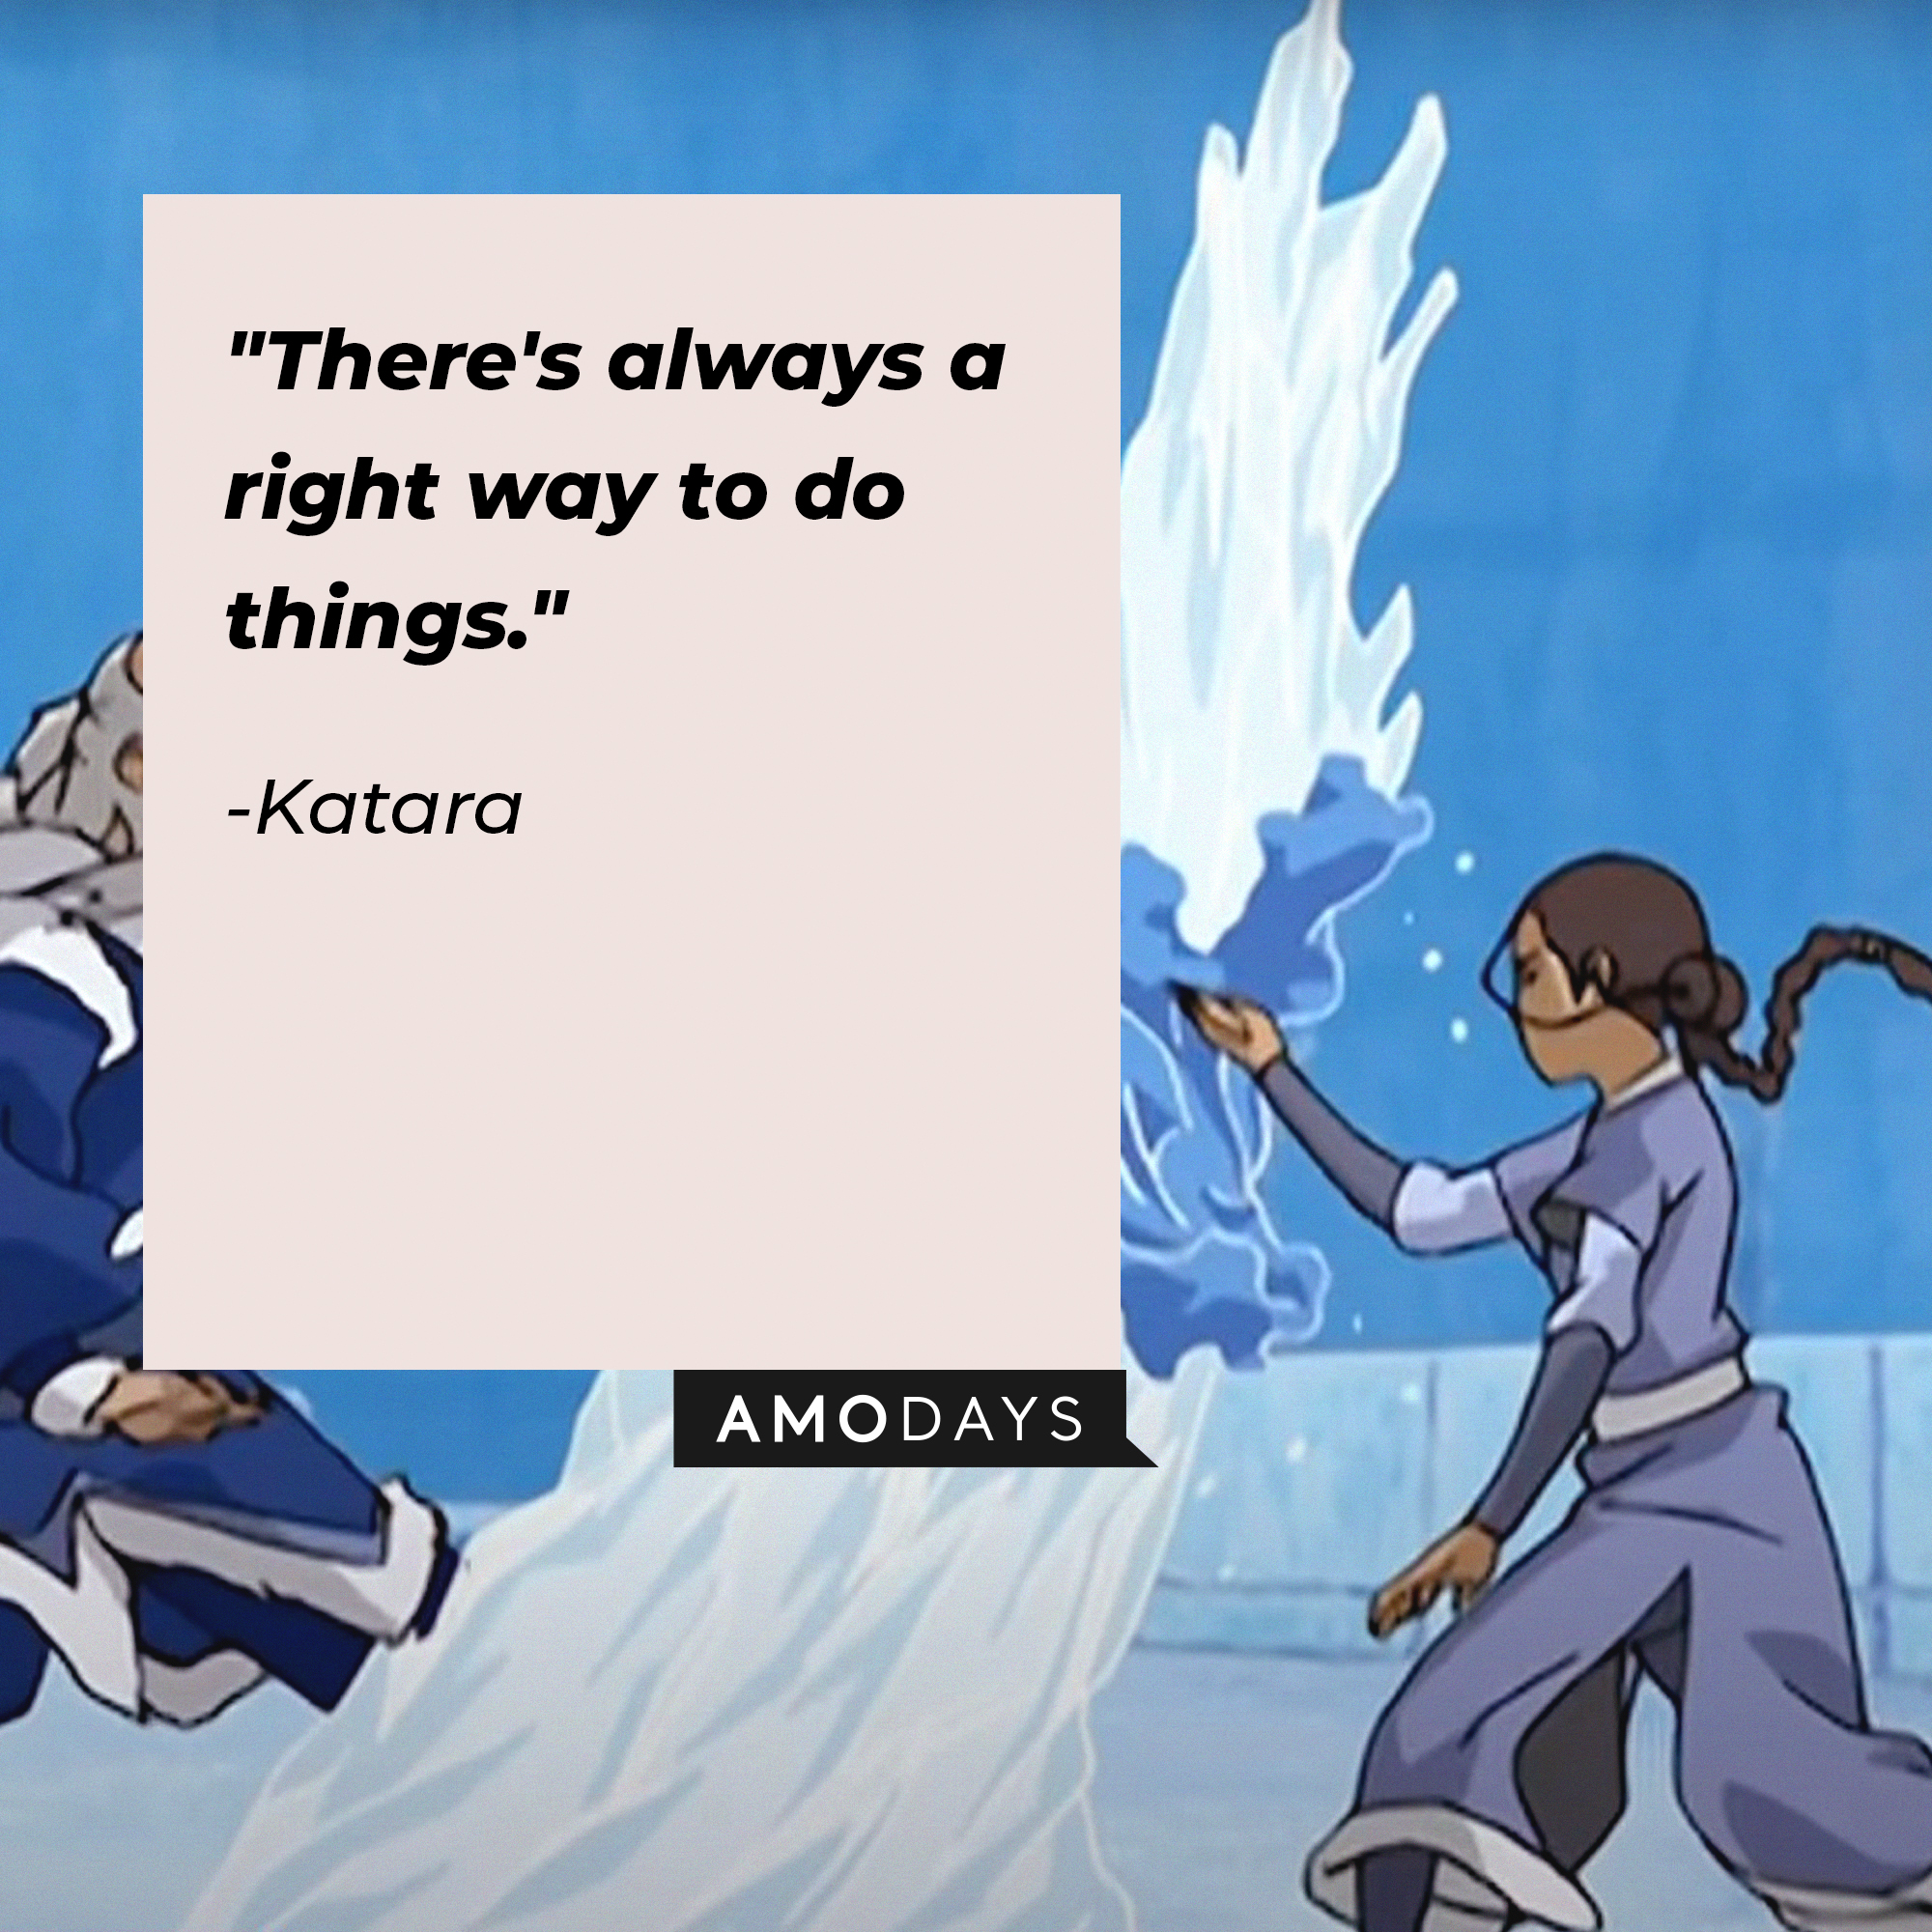 Katara's quote: "There's always a right way to do things." | Source: Youtube.com/TeamAvatar